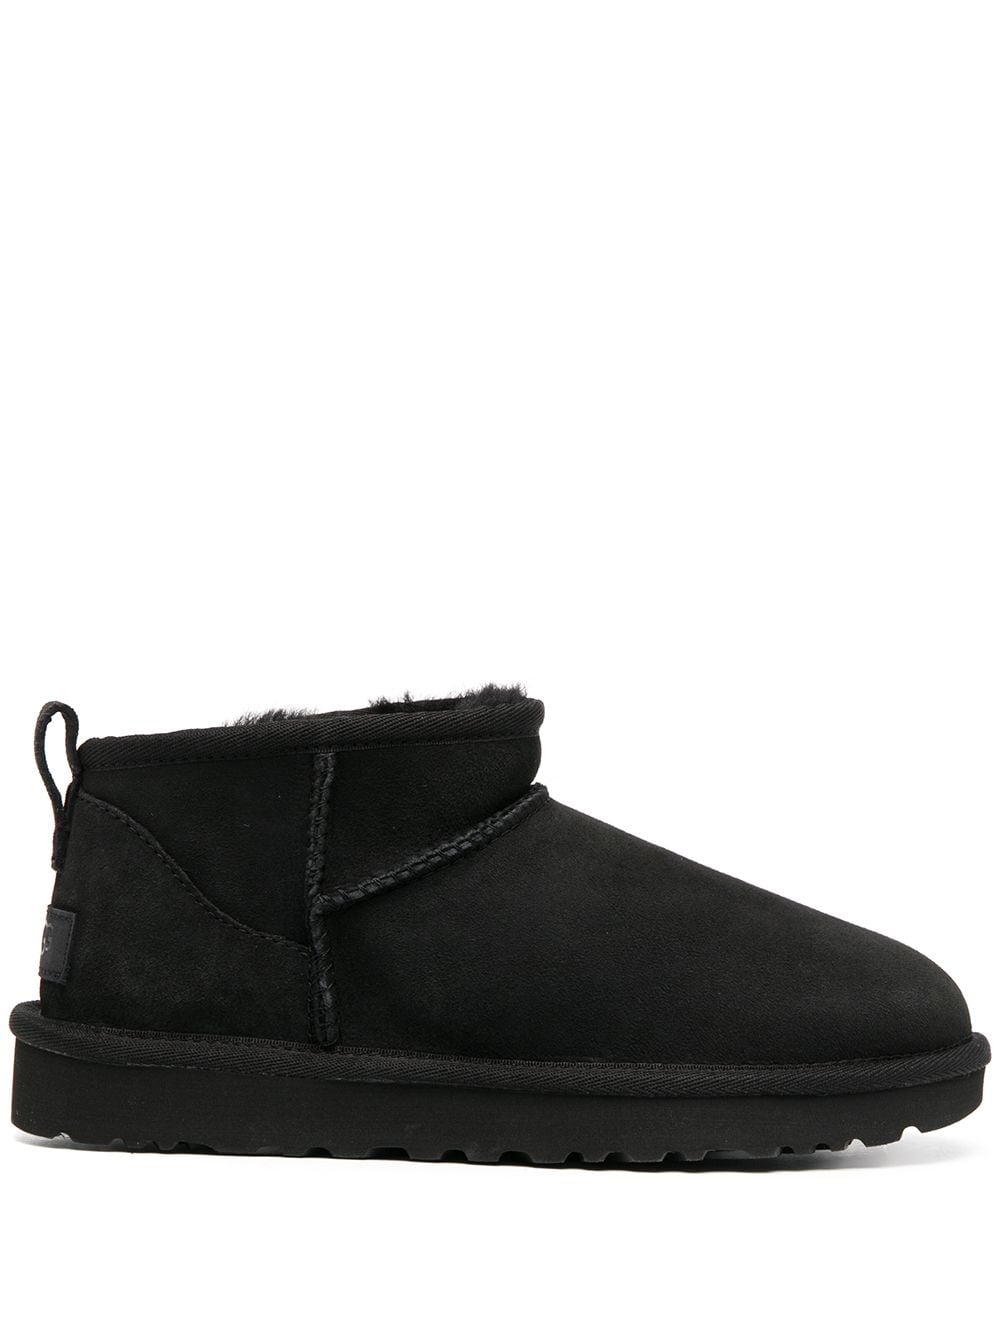 Black Farfetch Shoes Boots Ankle Boots Classic Ultra Mini boots 